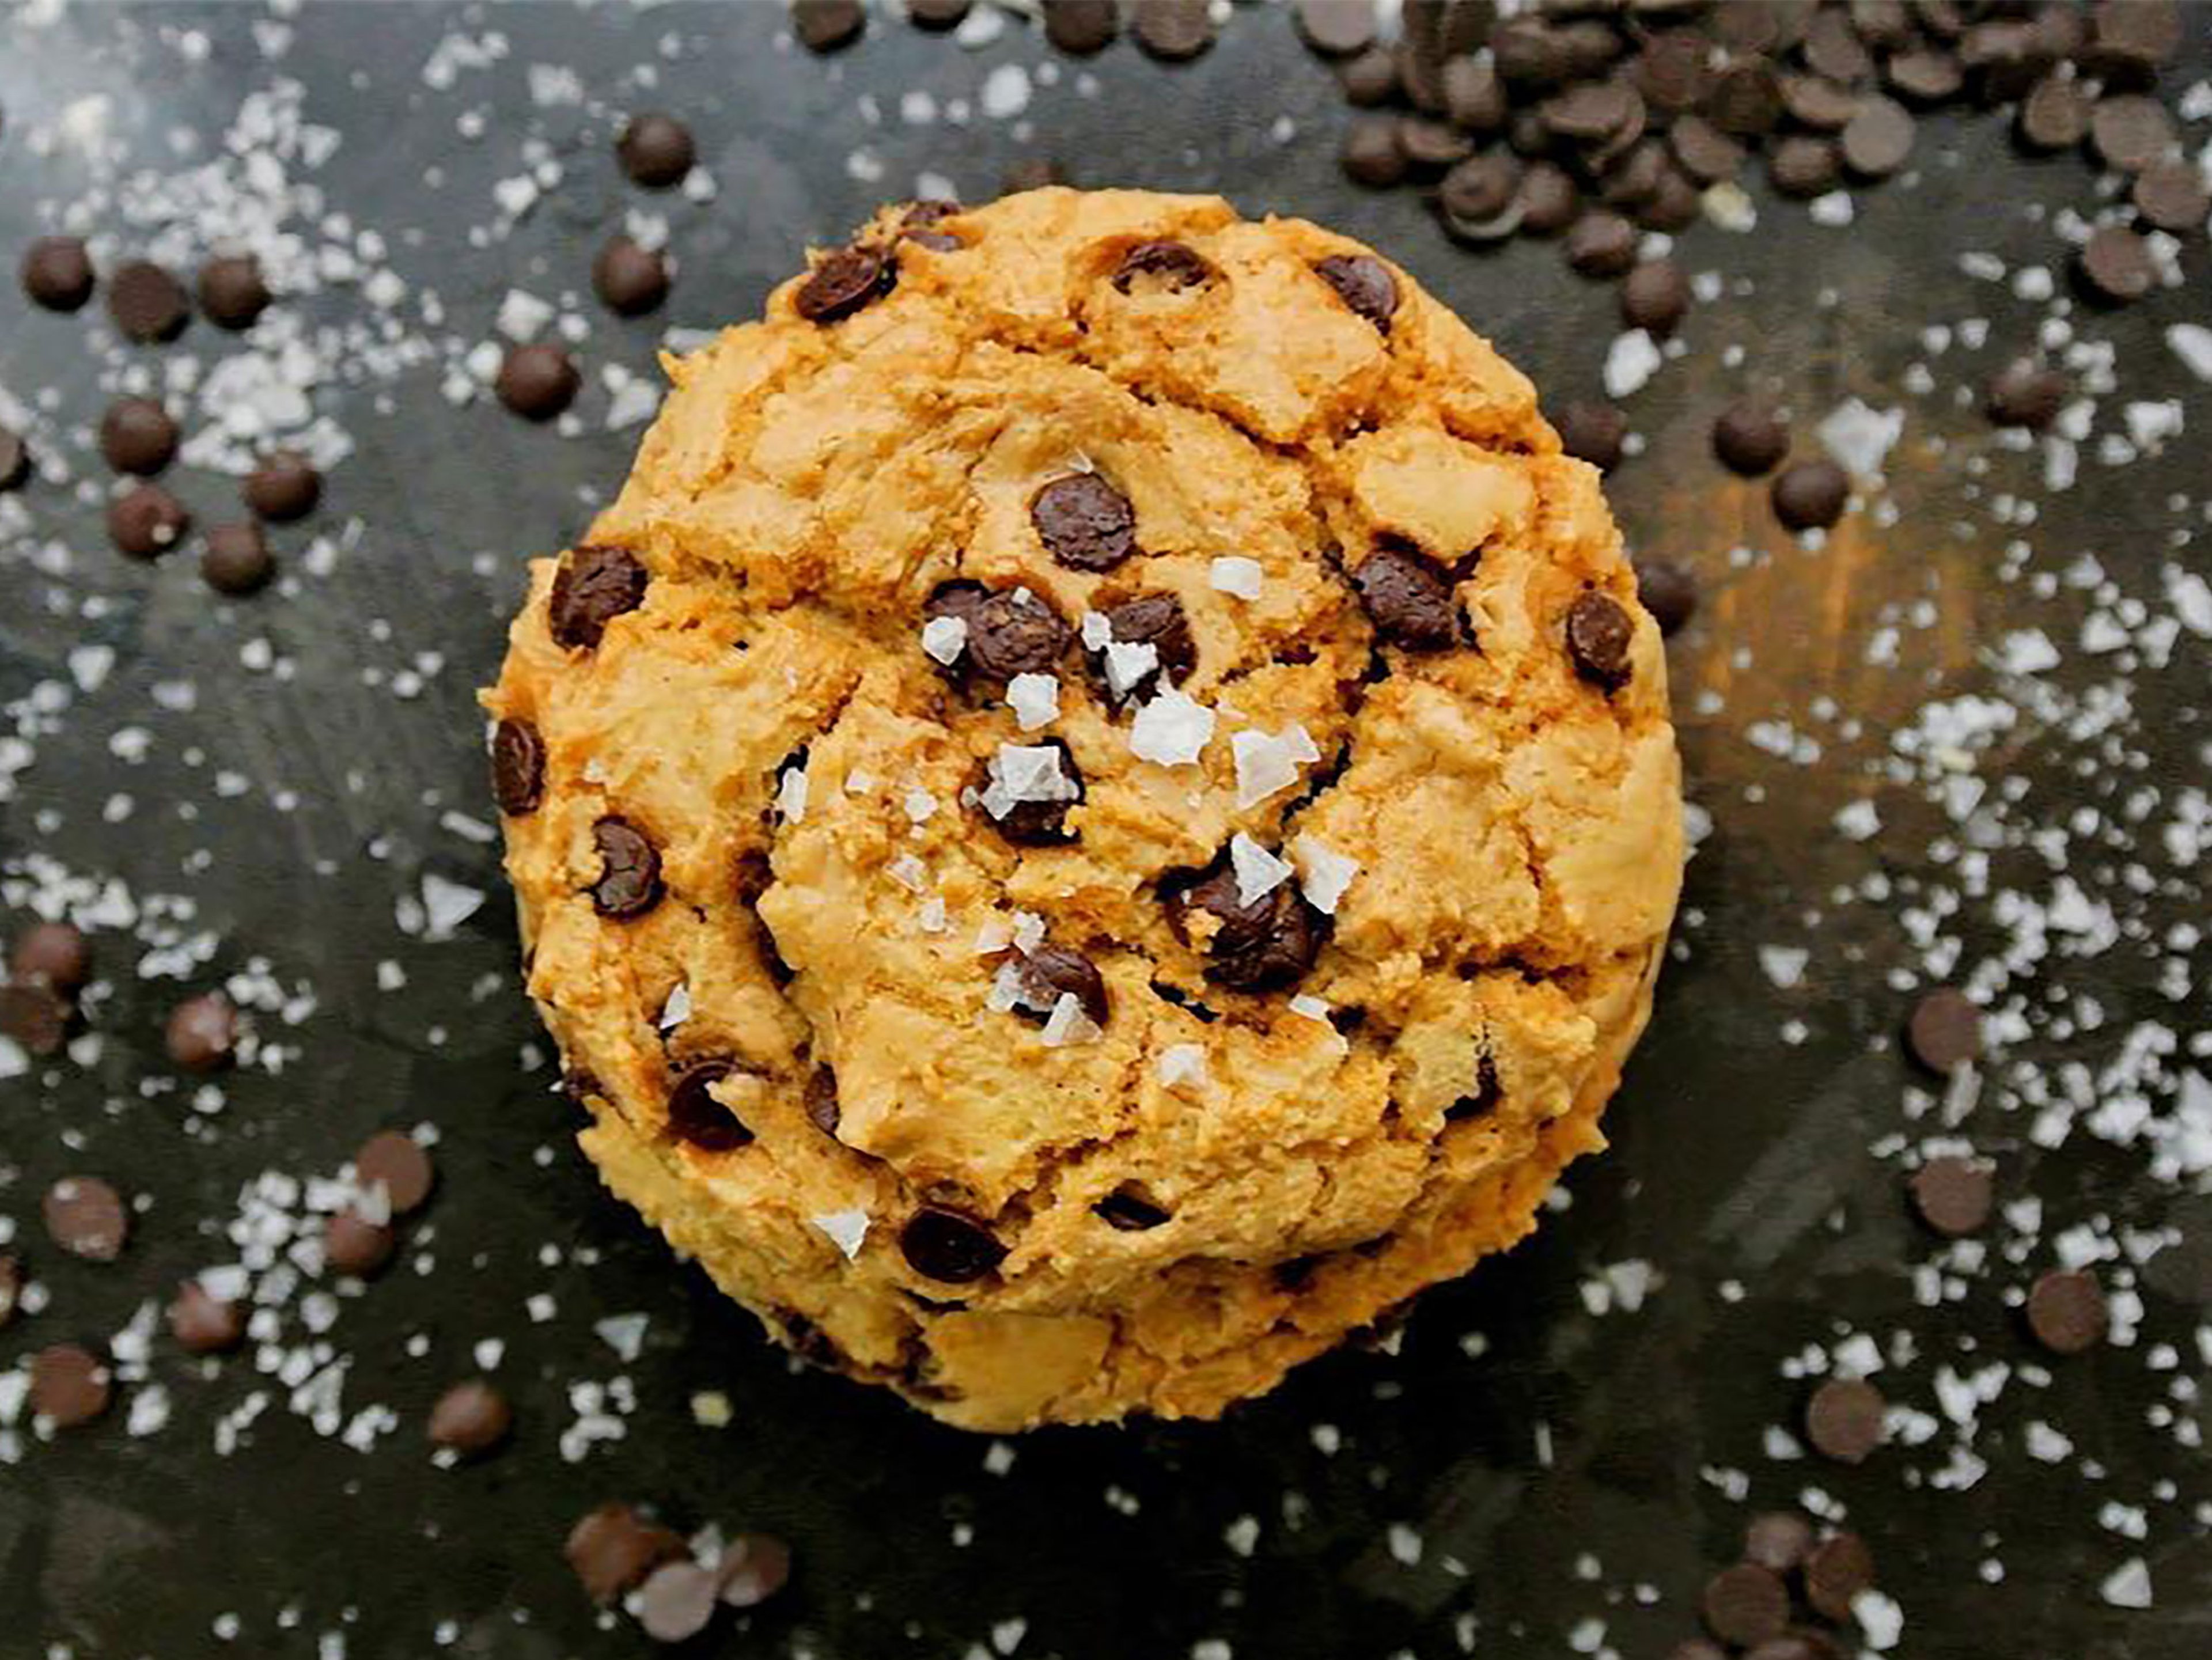 Crazy about Cookies! Your #KSgrams